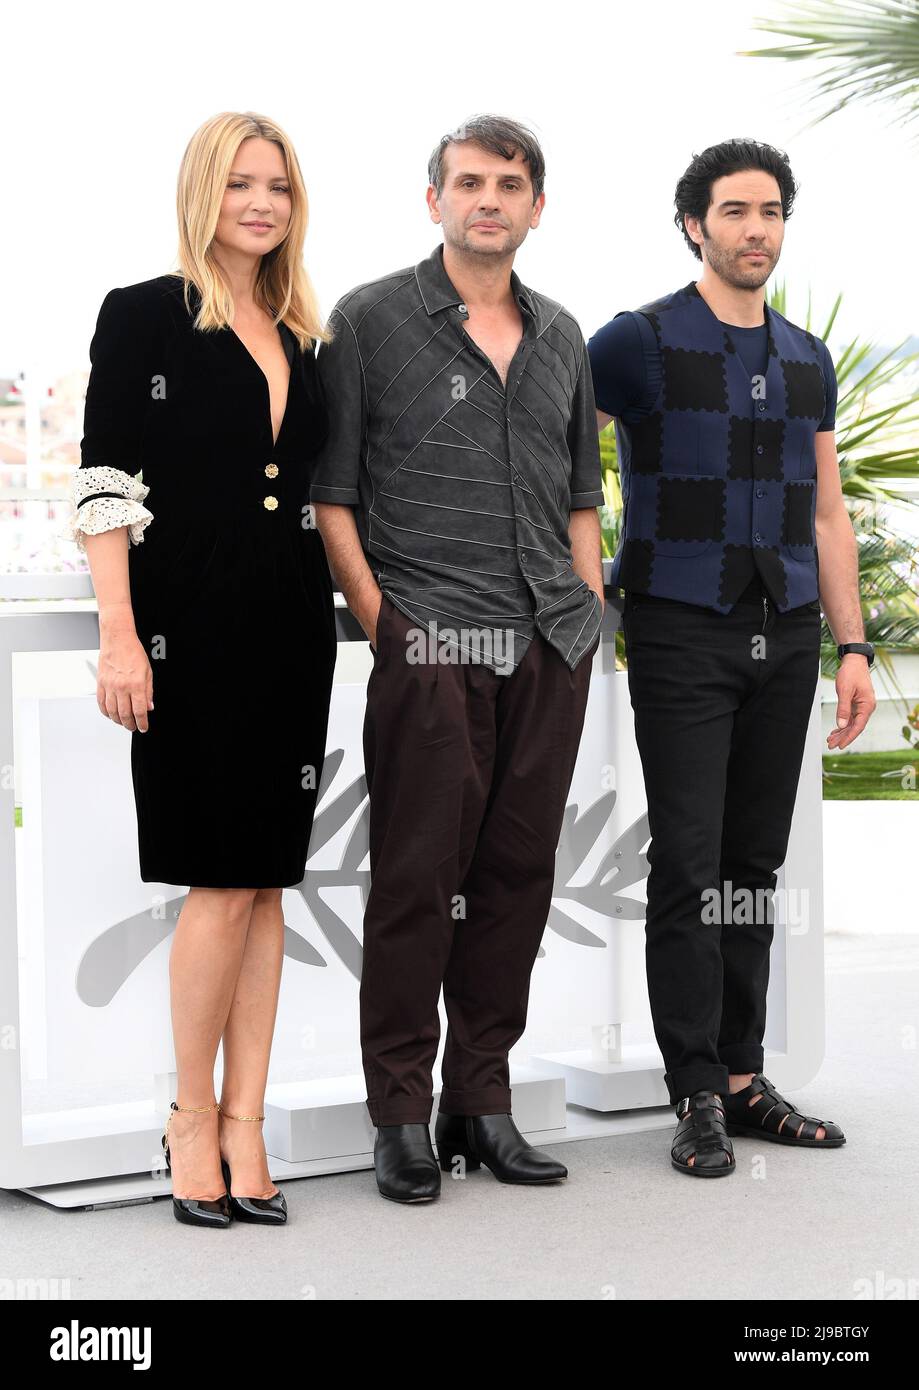 Cannes, France. 22nd May, 2022. French actor Tahar Rahim, director Serge Bozon and actress Virginie Efira attend the photo call for Don Juan at Palais des Festivals at the 75th Cannes Film Festival, France on Sunday, May 22, 2022. Photo by Rune Hellestad/ Credit: UPI/Alamy Live News Stock Photo